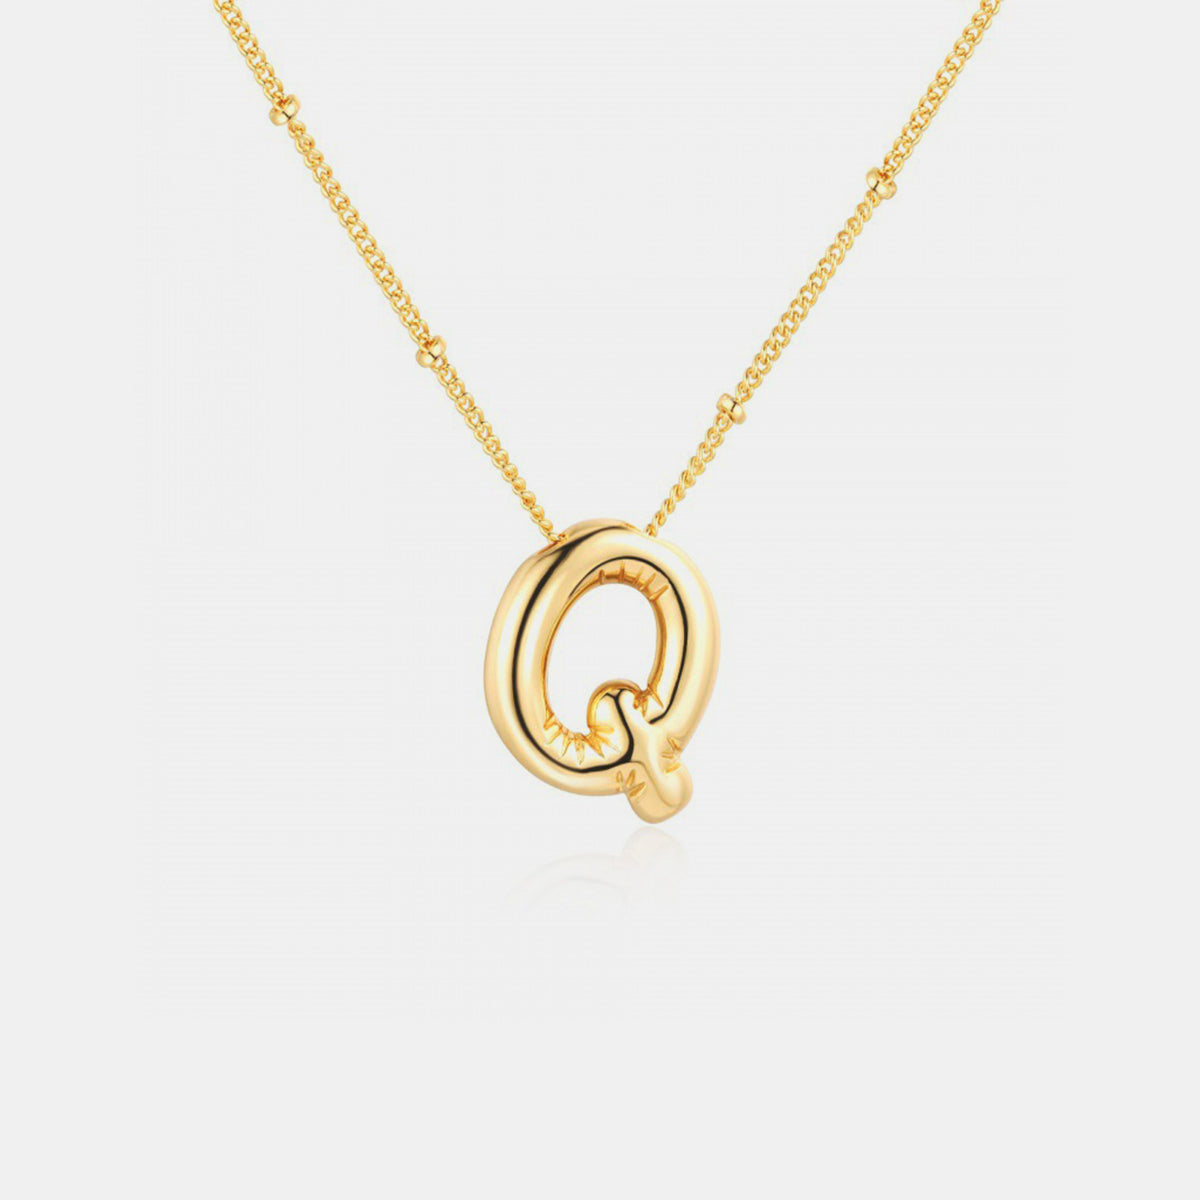 TEEK - K-S Gold-Plated Letter Pendant Necklace JEWELRY TEEK Trend Style Q  